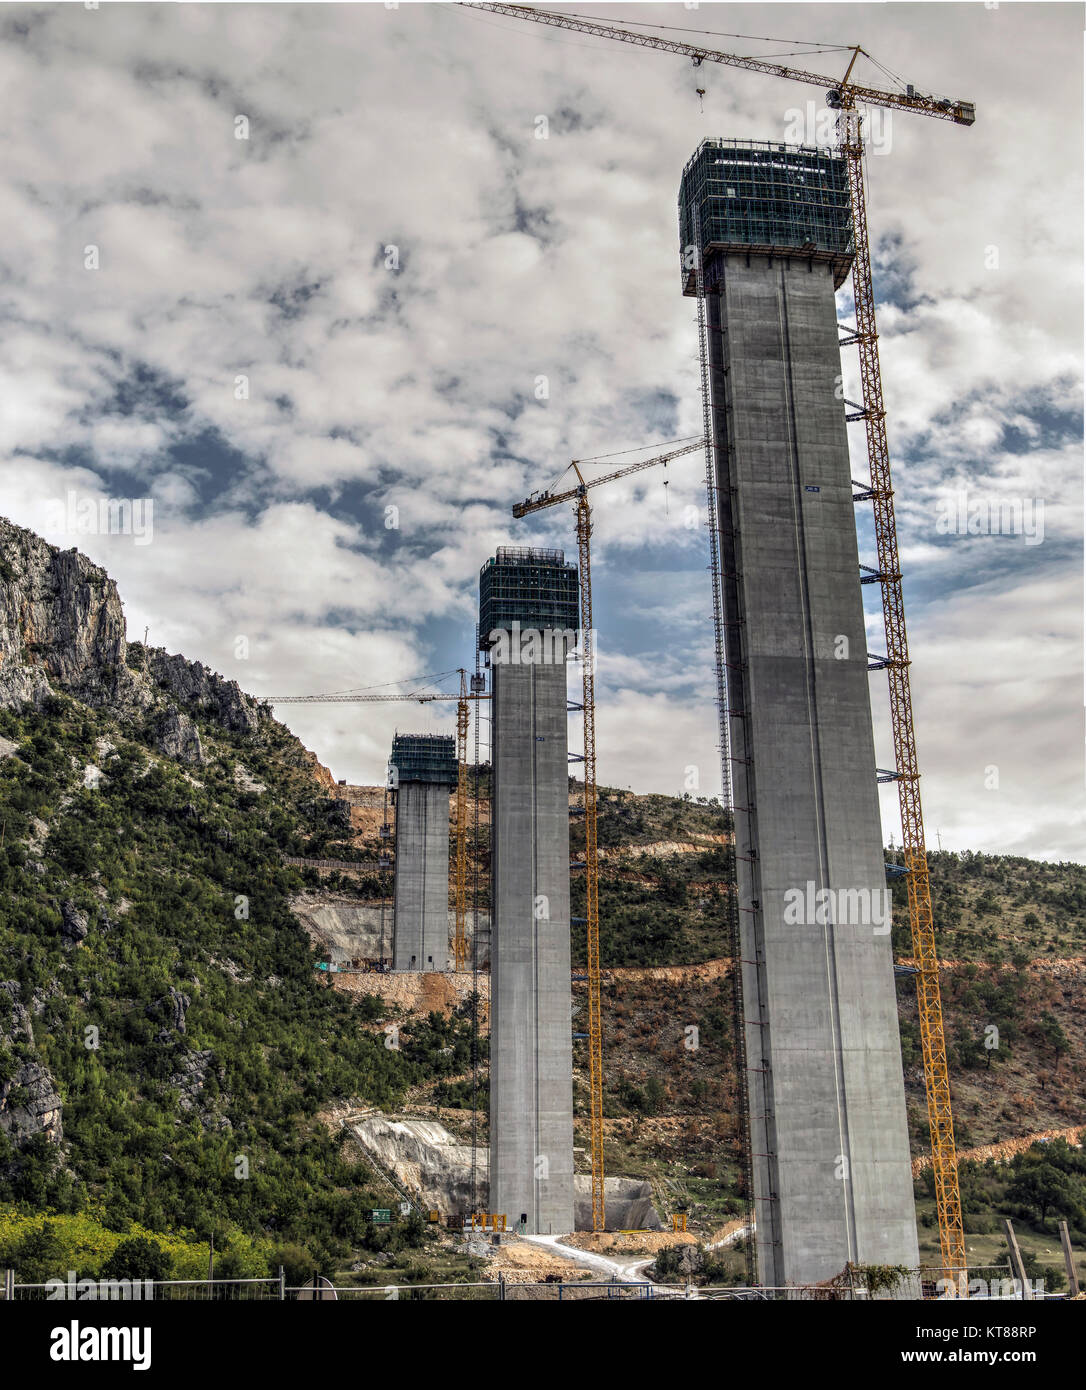 Montenegro, September 2017 - Construction of supporting concrete pillars for the future bridge on the Bar-Boljare highway Stock Photo